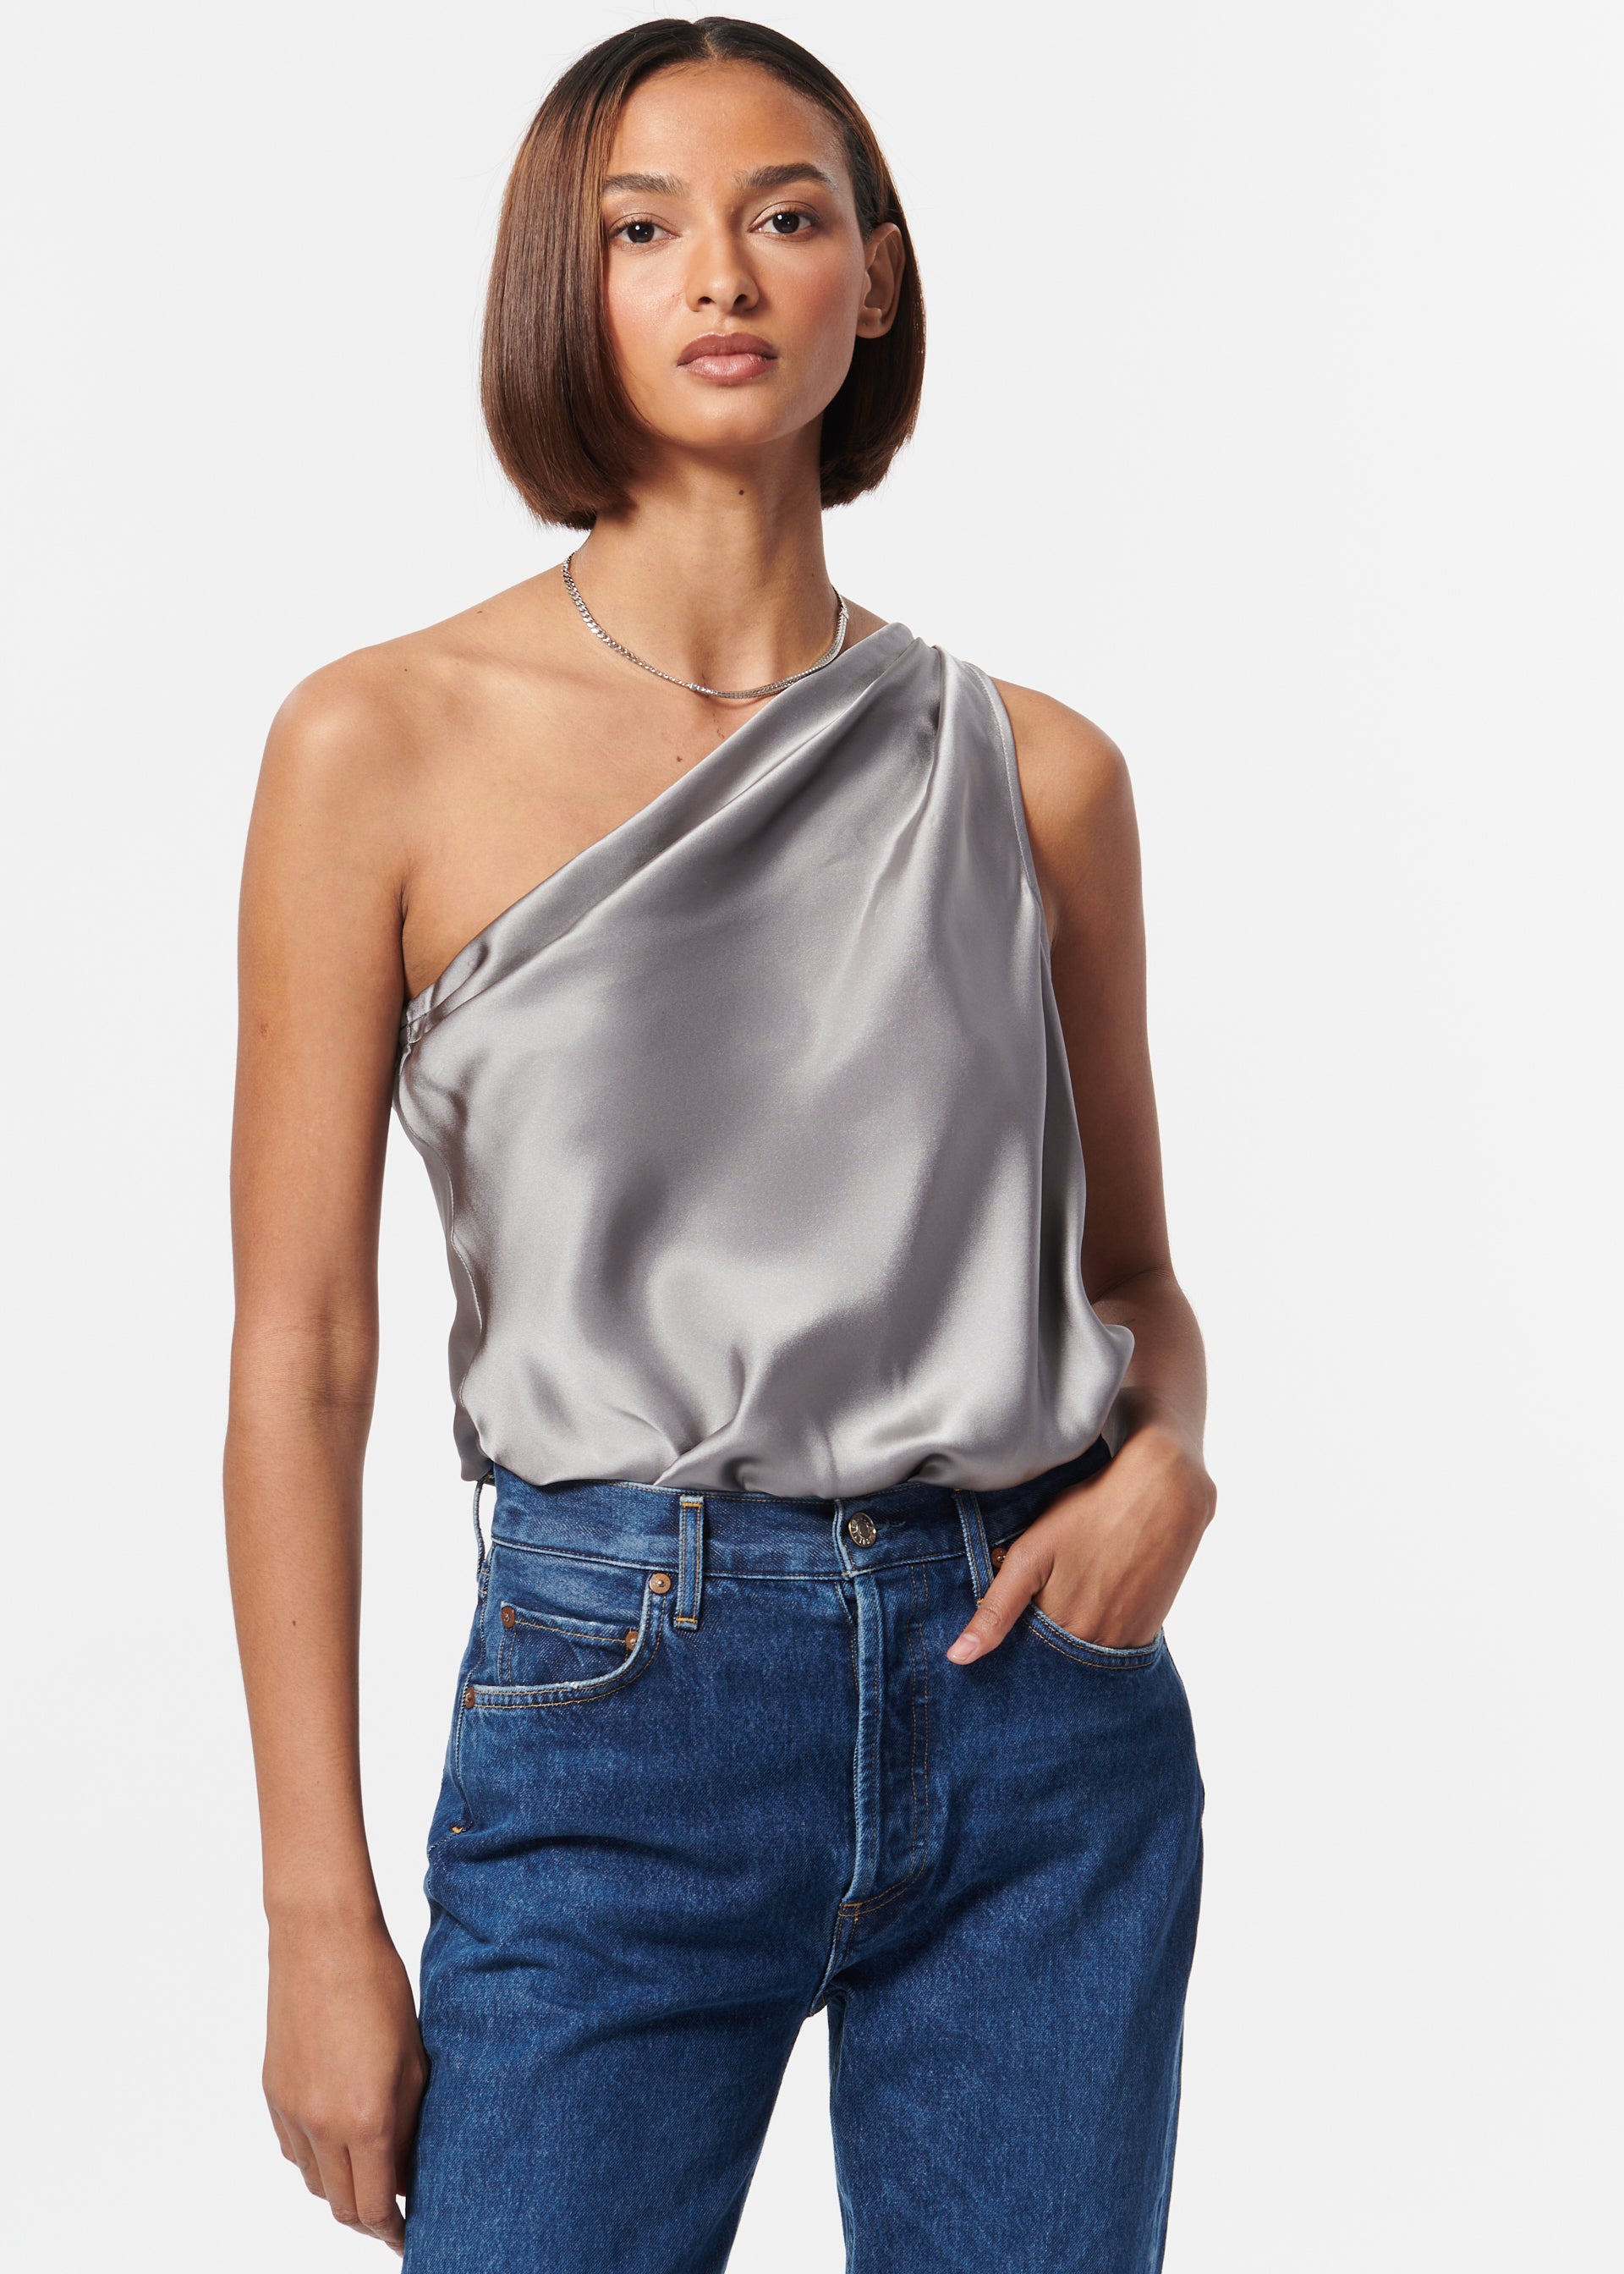 Cami NYC - Darby Bodysuit - Paradise – Collins St